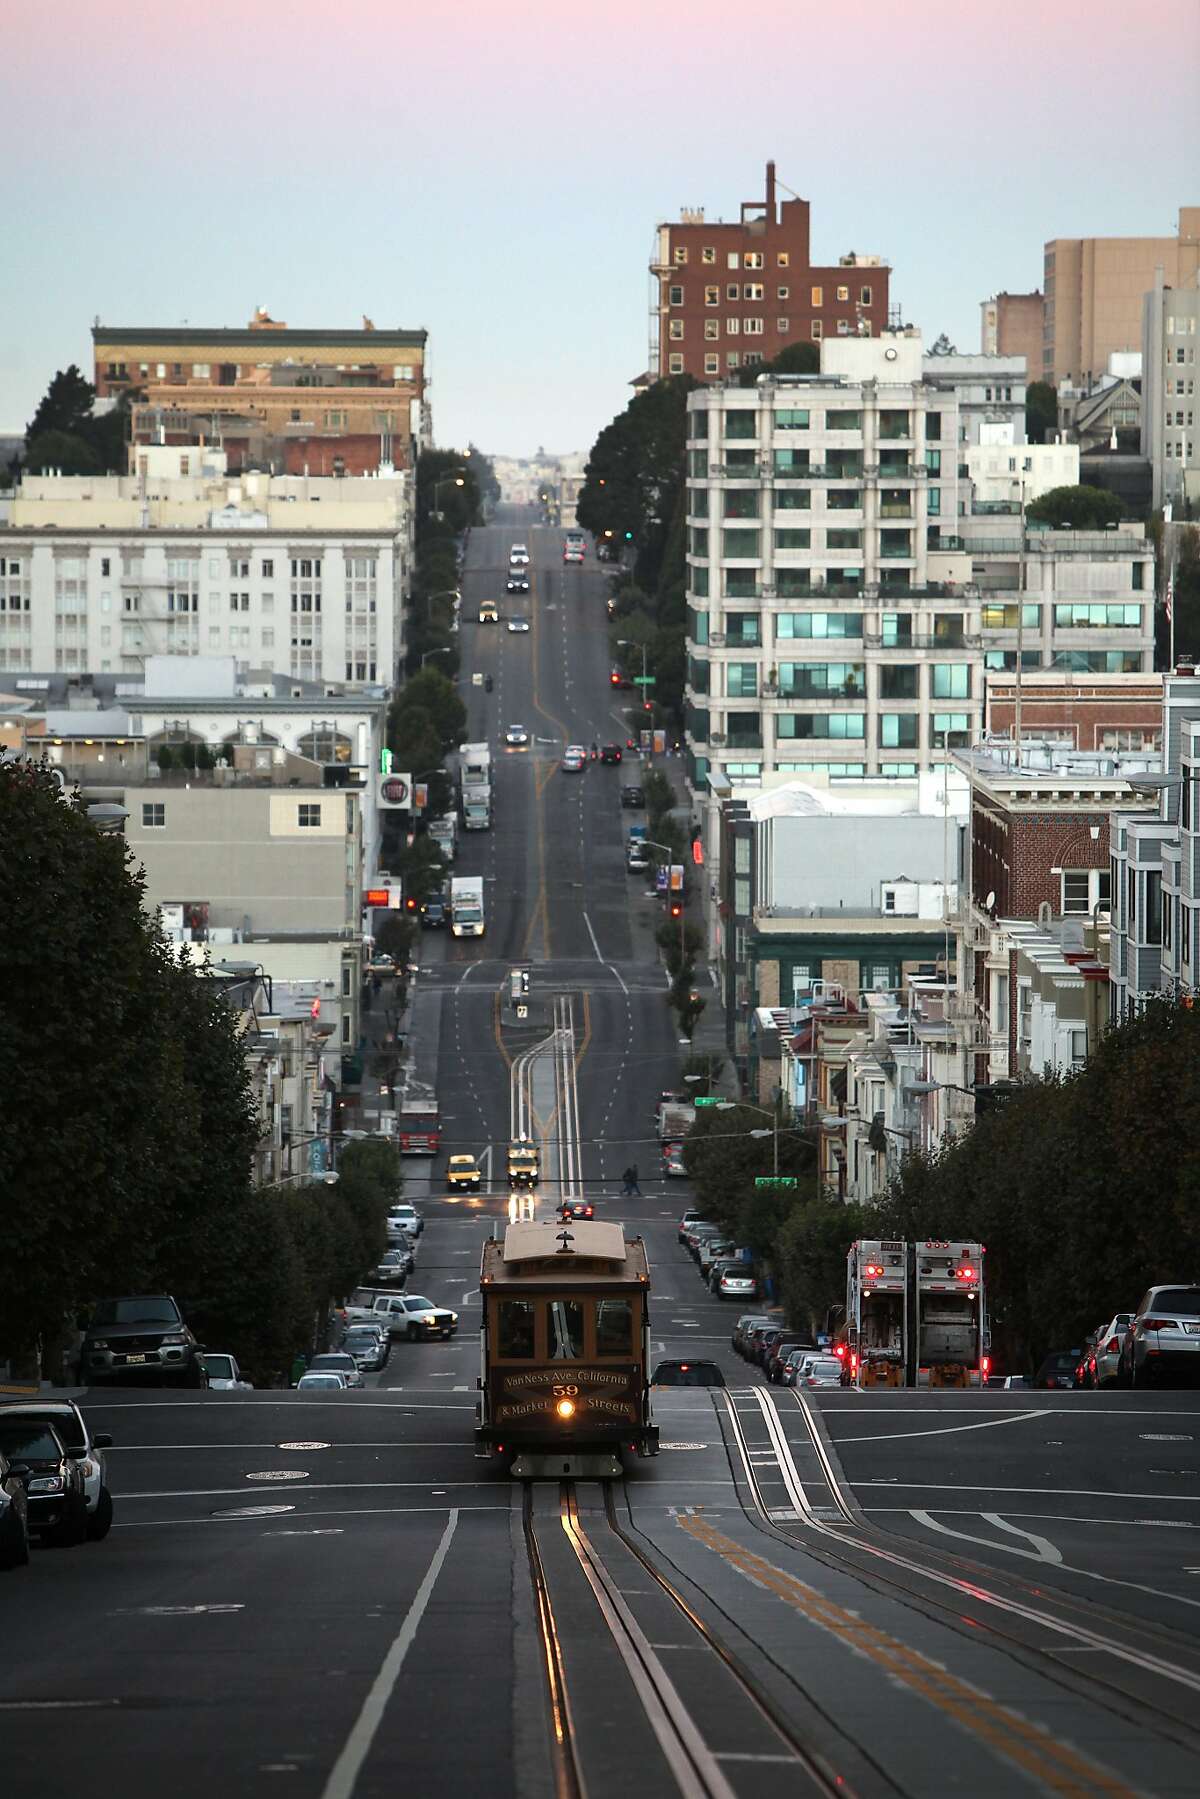 A cable car ascends Nob Hill on California Street at Leavenworth Street before sunrise on September 6, 2013 in the Nob Hill area of San Francisco, Calif.